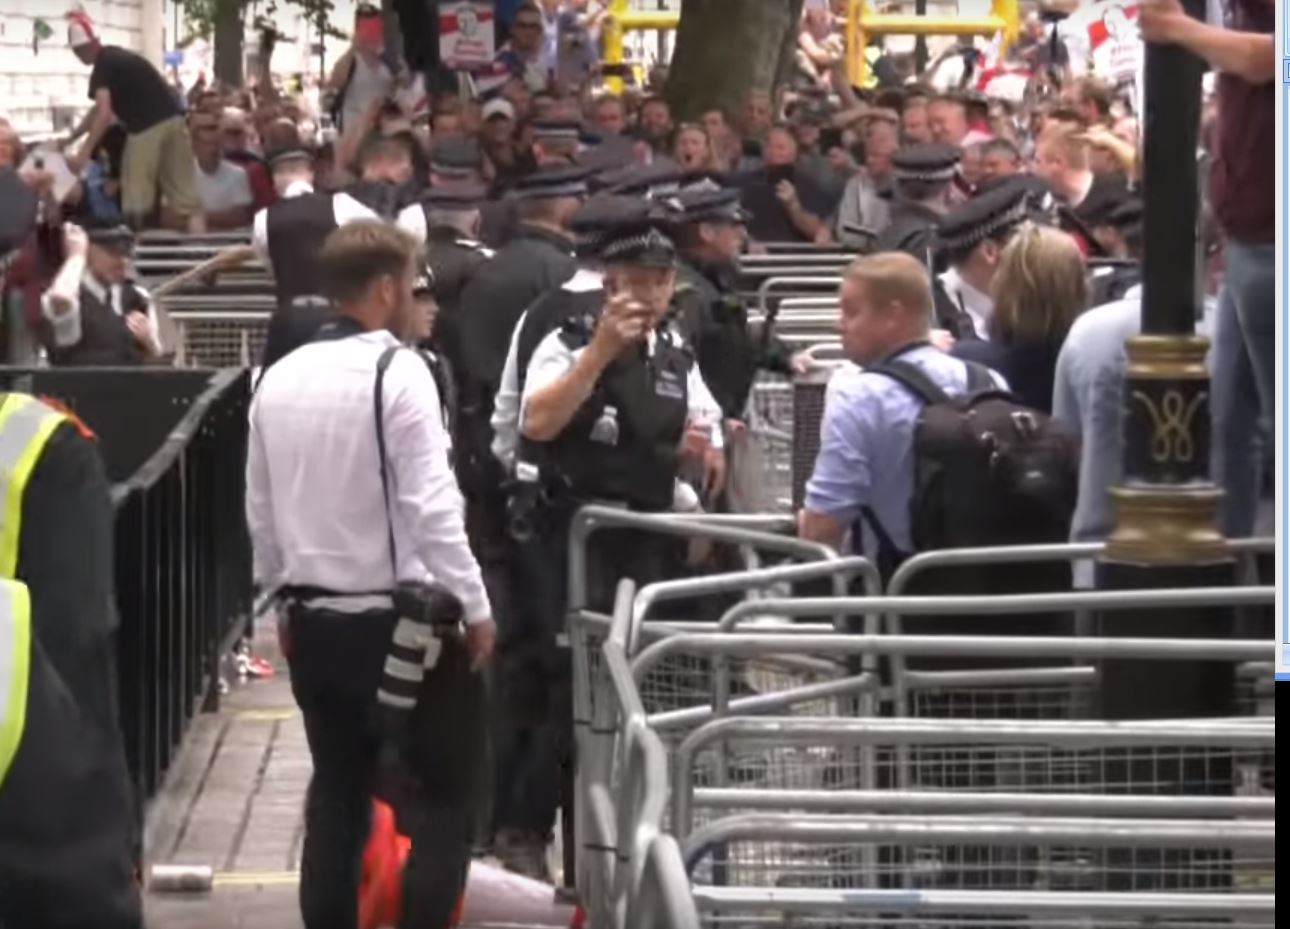 The free Tommy Robinson protest of June 9 turned ugly